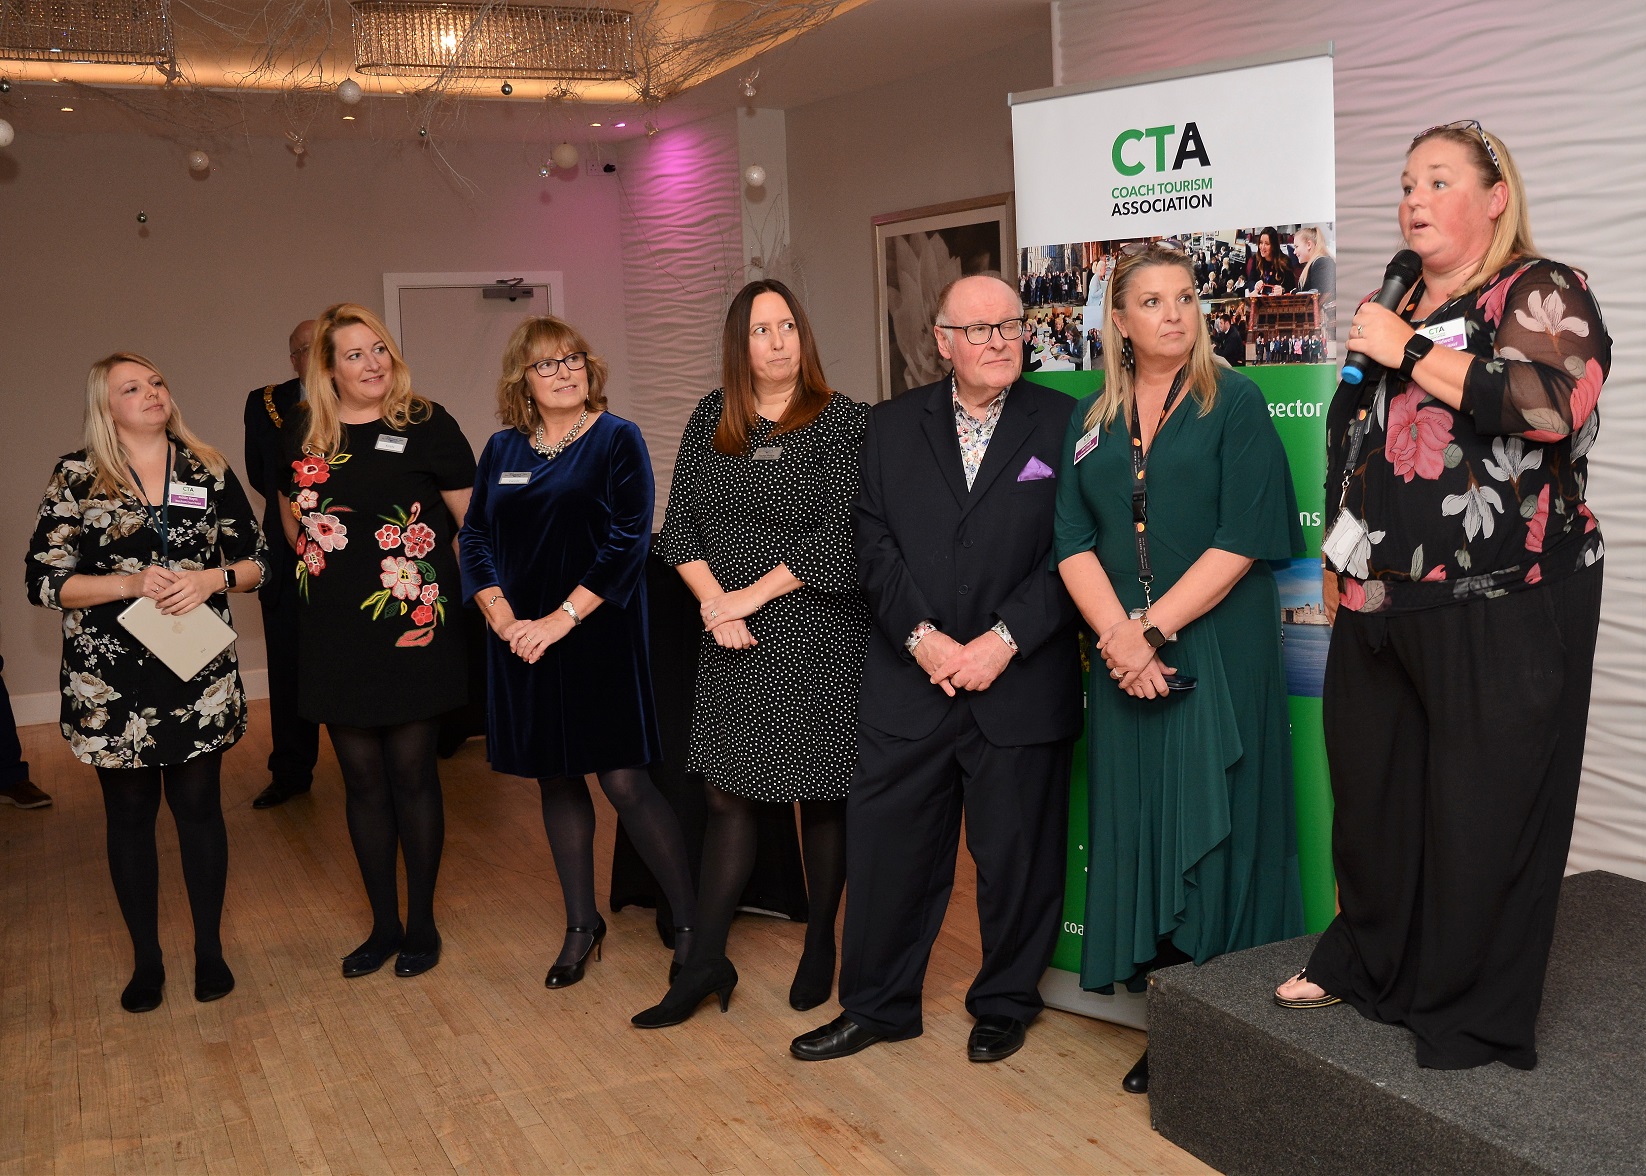 Coach Tourism Association winter networking event sees market optimism for recovery